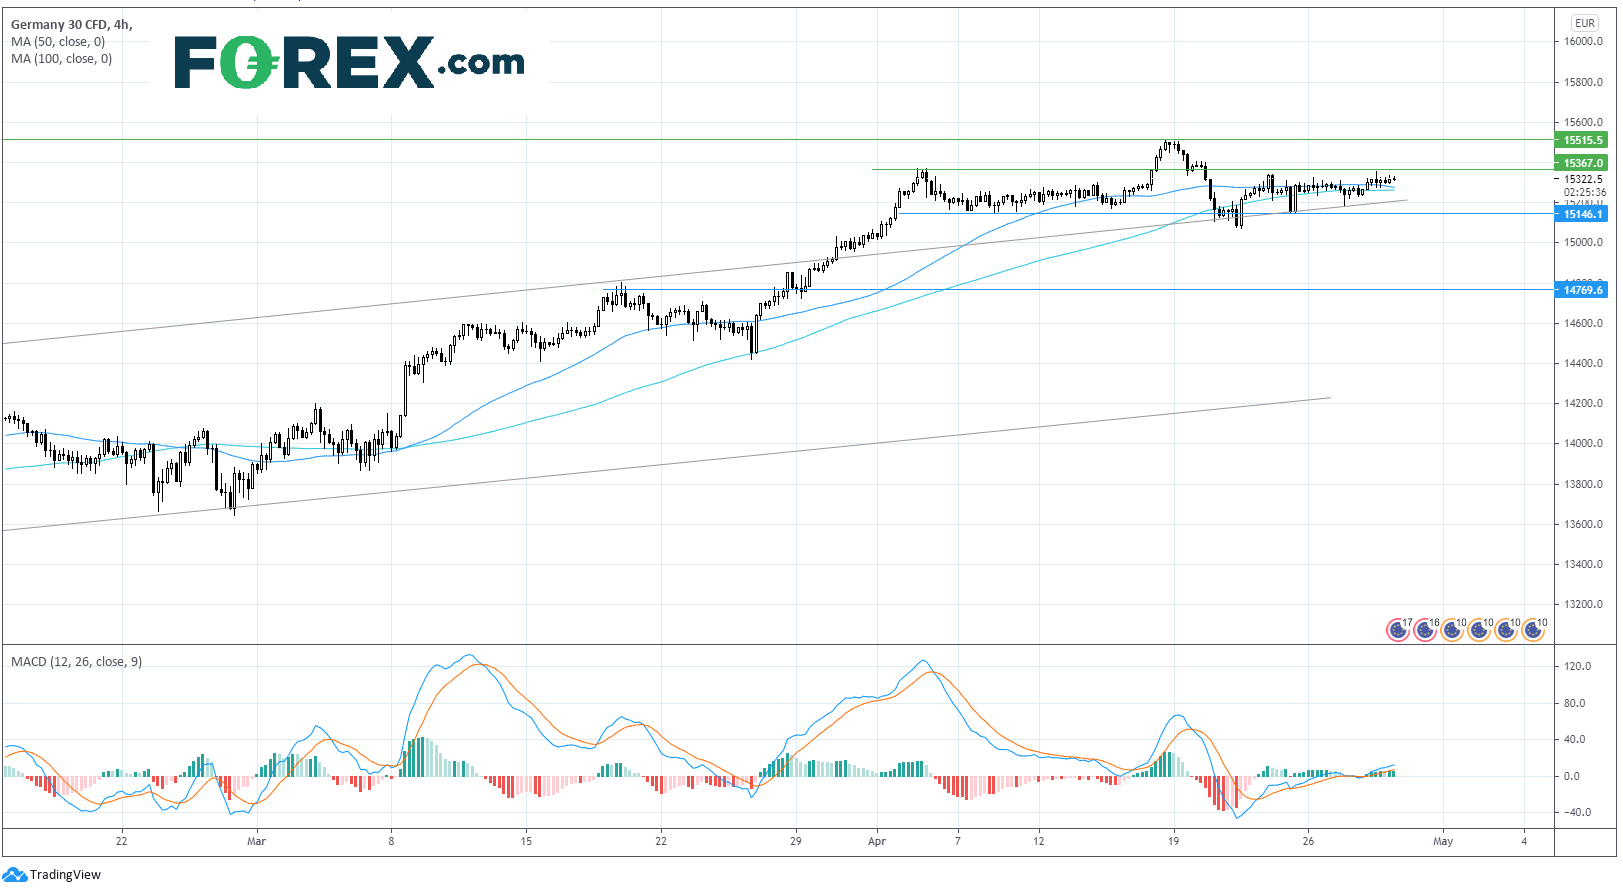 Chart analysis of DAX. Published in April 2021 by FOREX.com